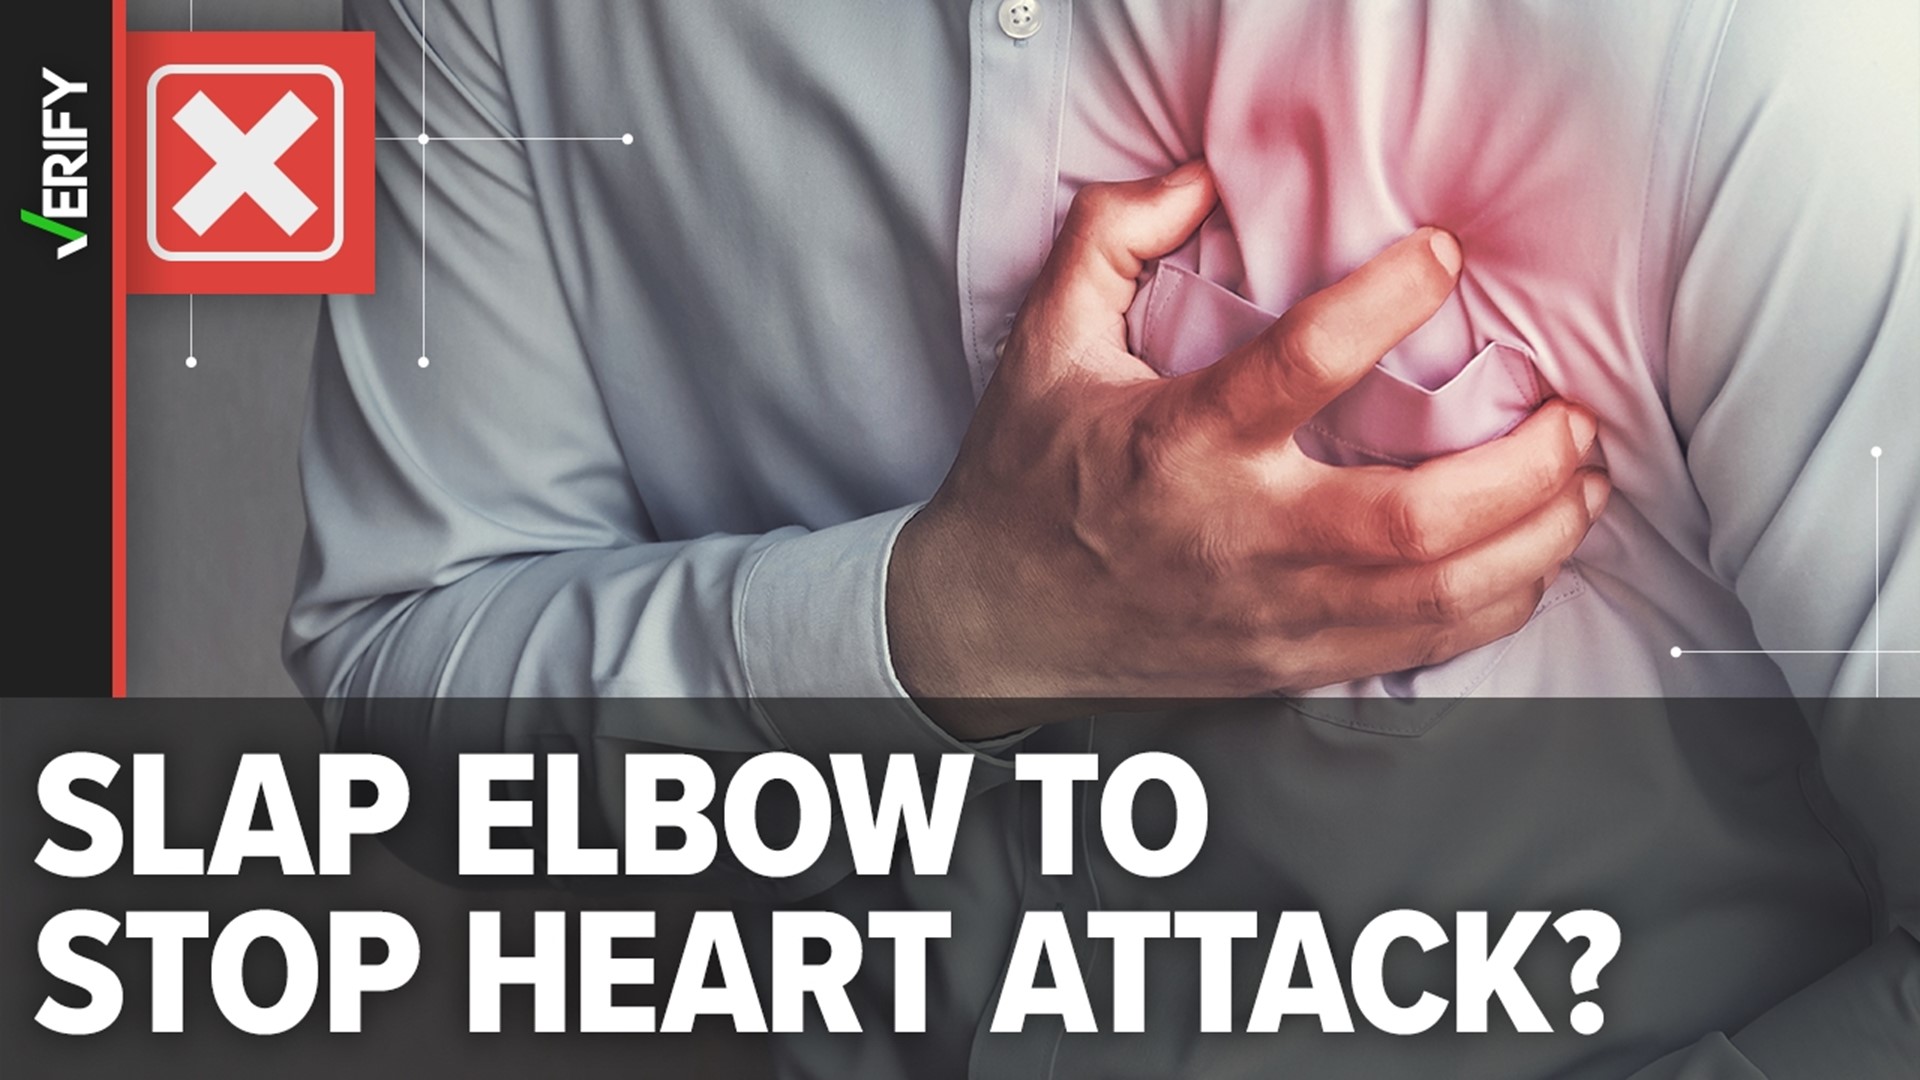 There’s no evidence to suggest slapping the inside of a person’s elbow can prevent or treat a heart attack like viral social media videos claim.